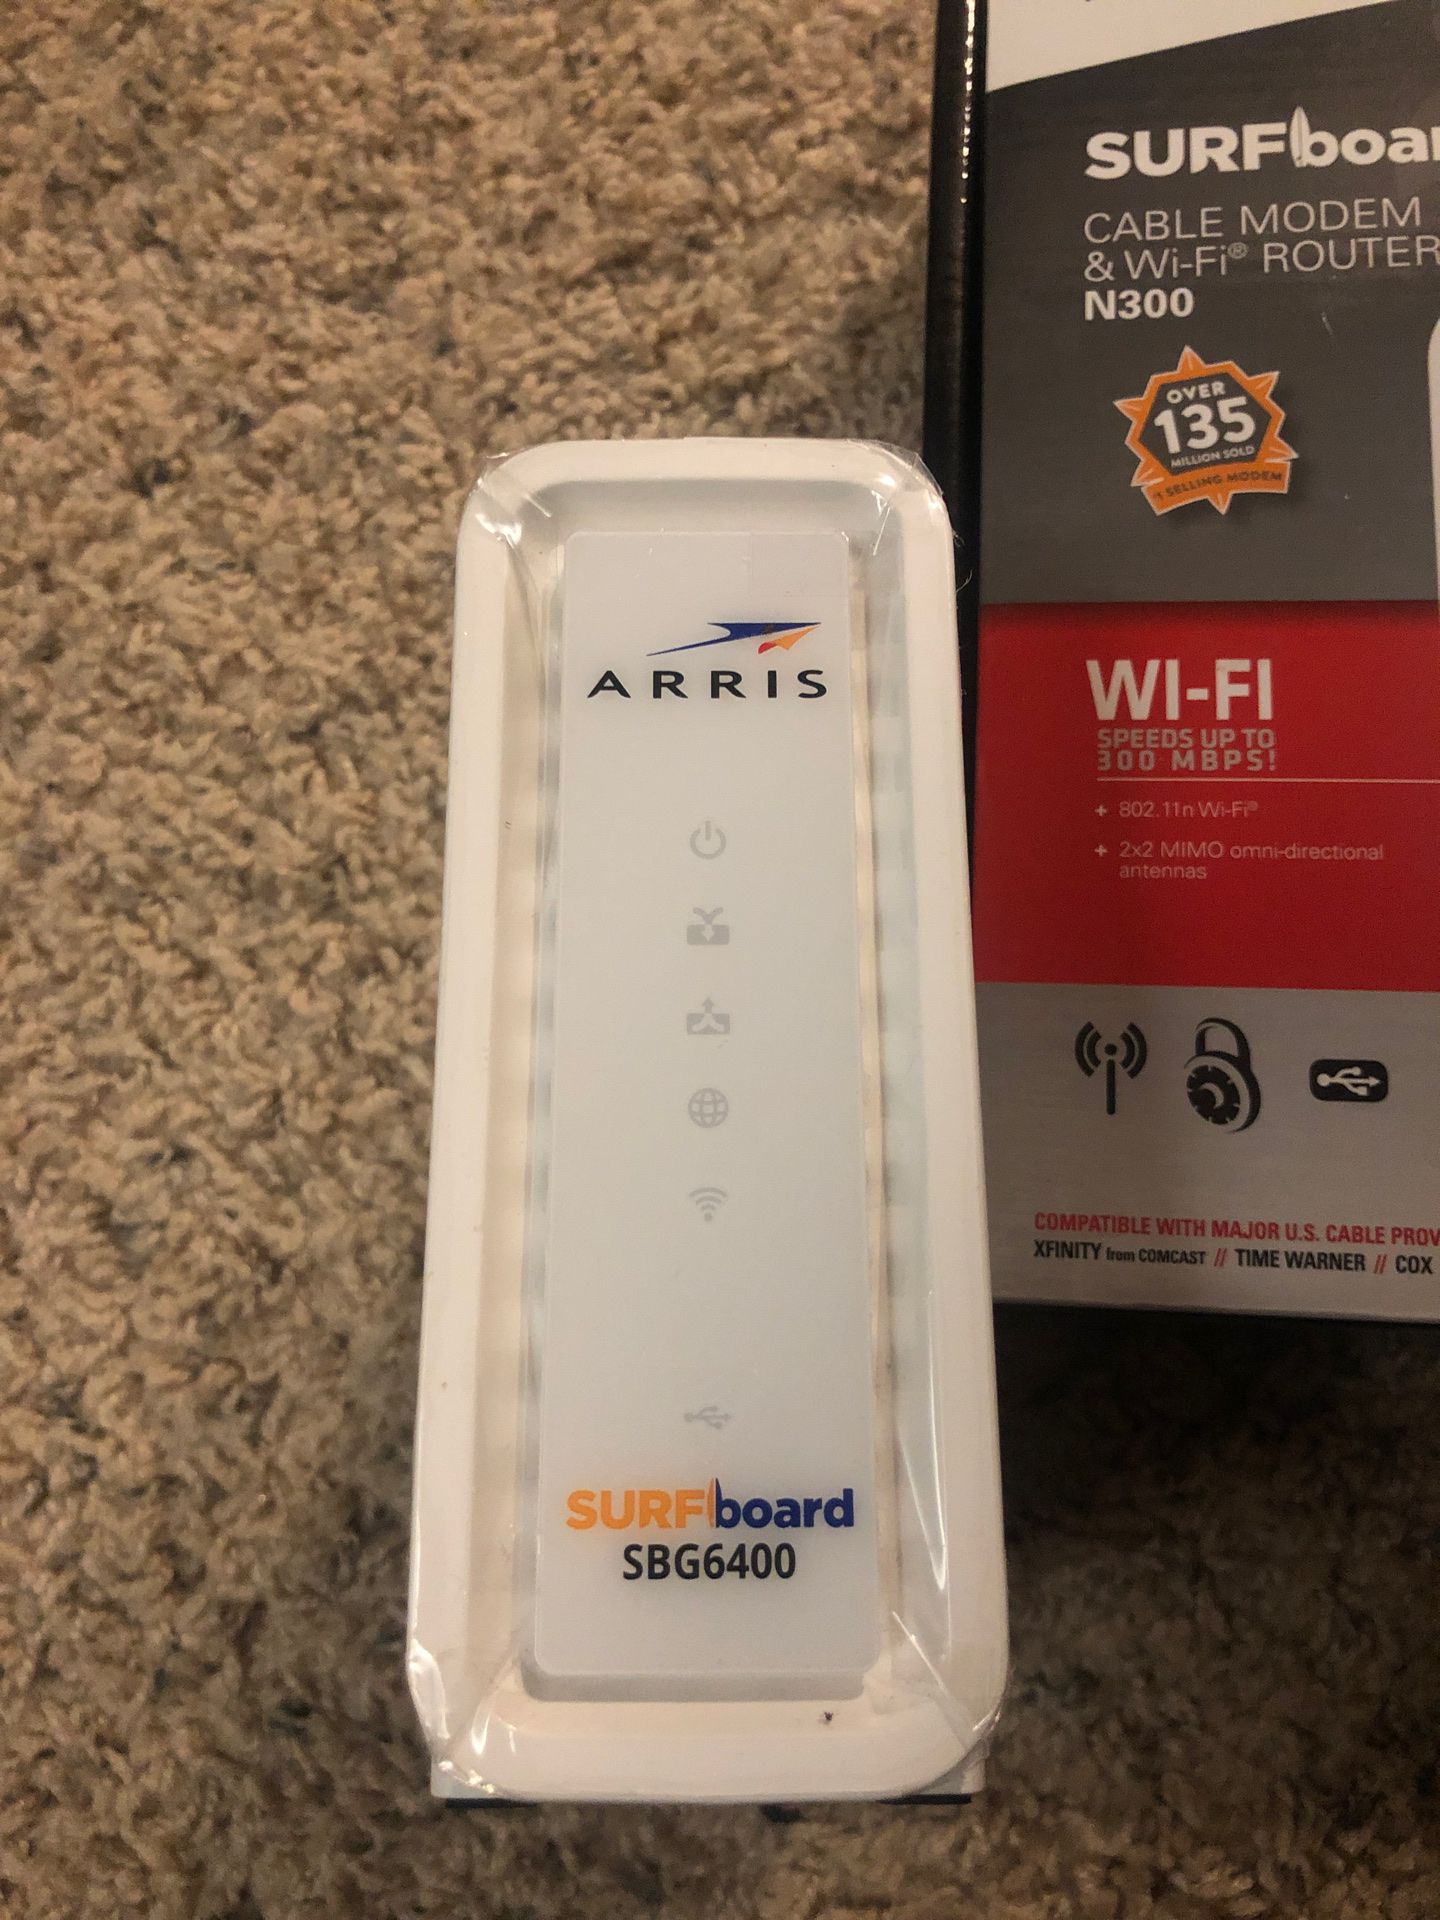 ARRIS SURFboard SBG6400 8x4 DOCSIS 3.0 Cable Modem / N300 Wi-Fi Router